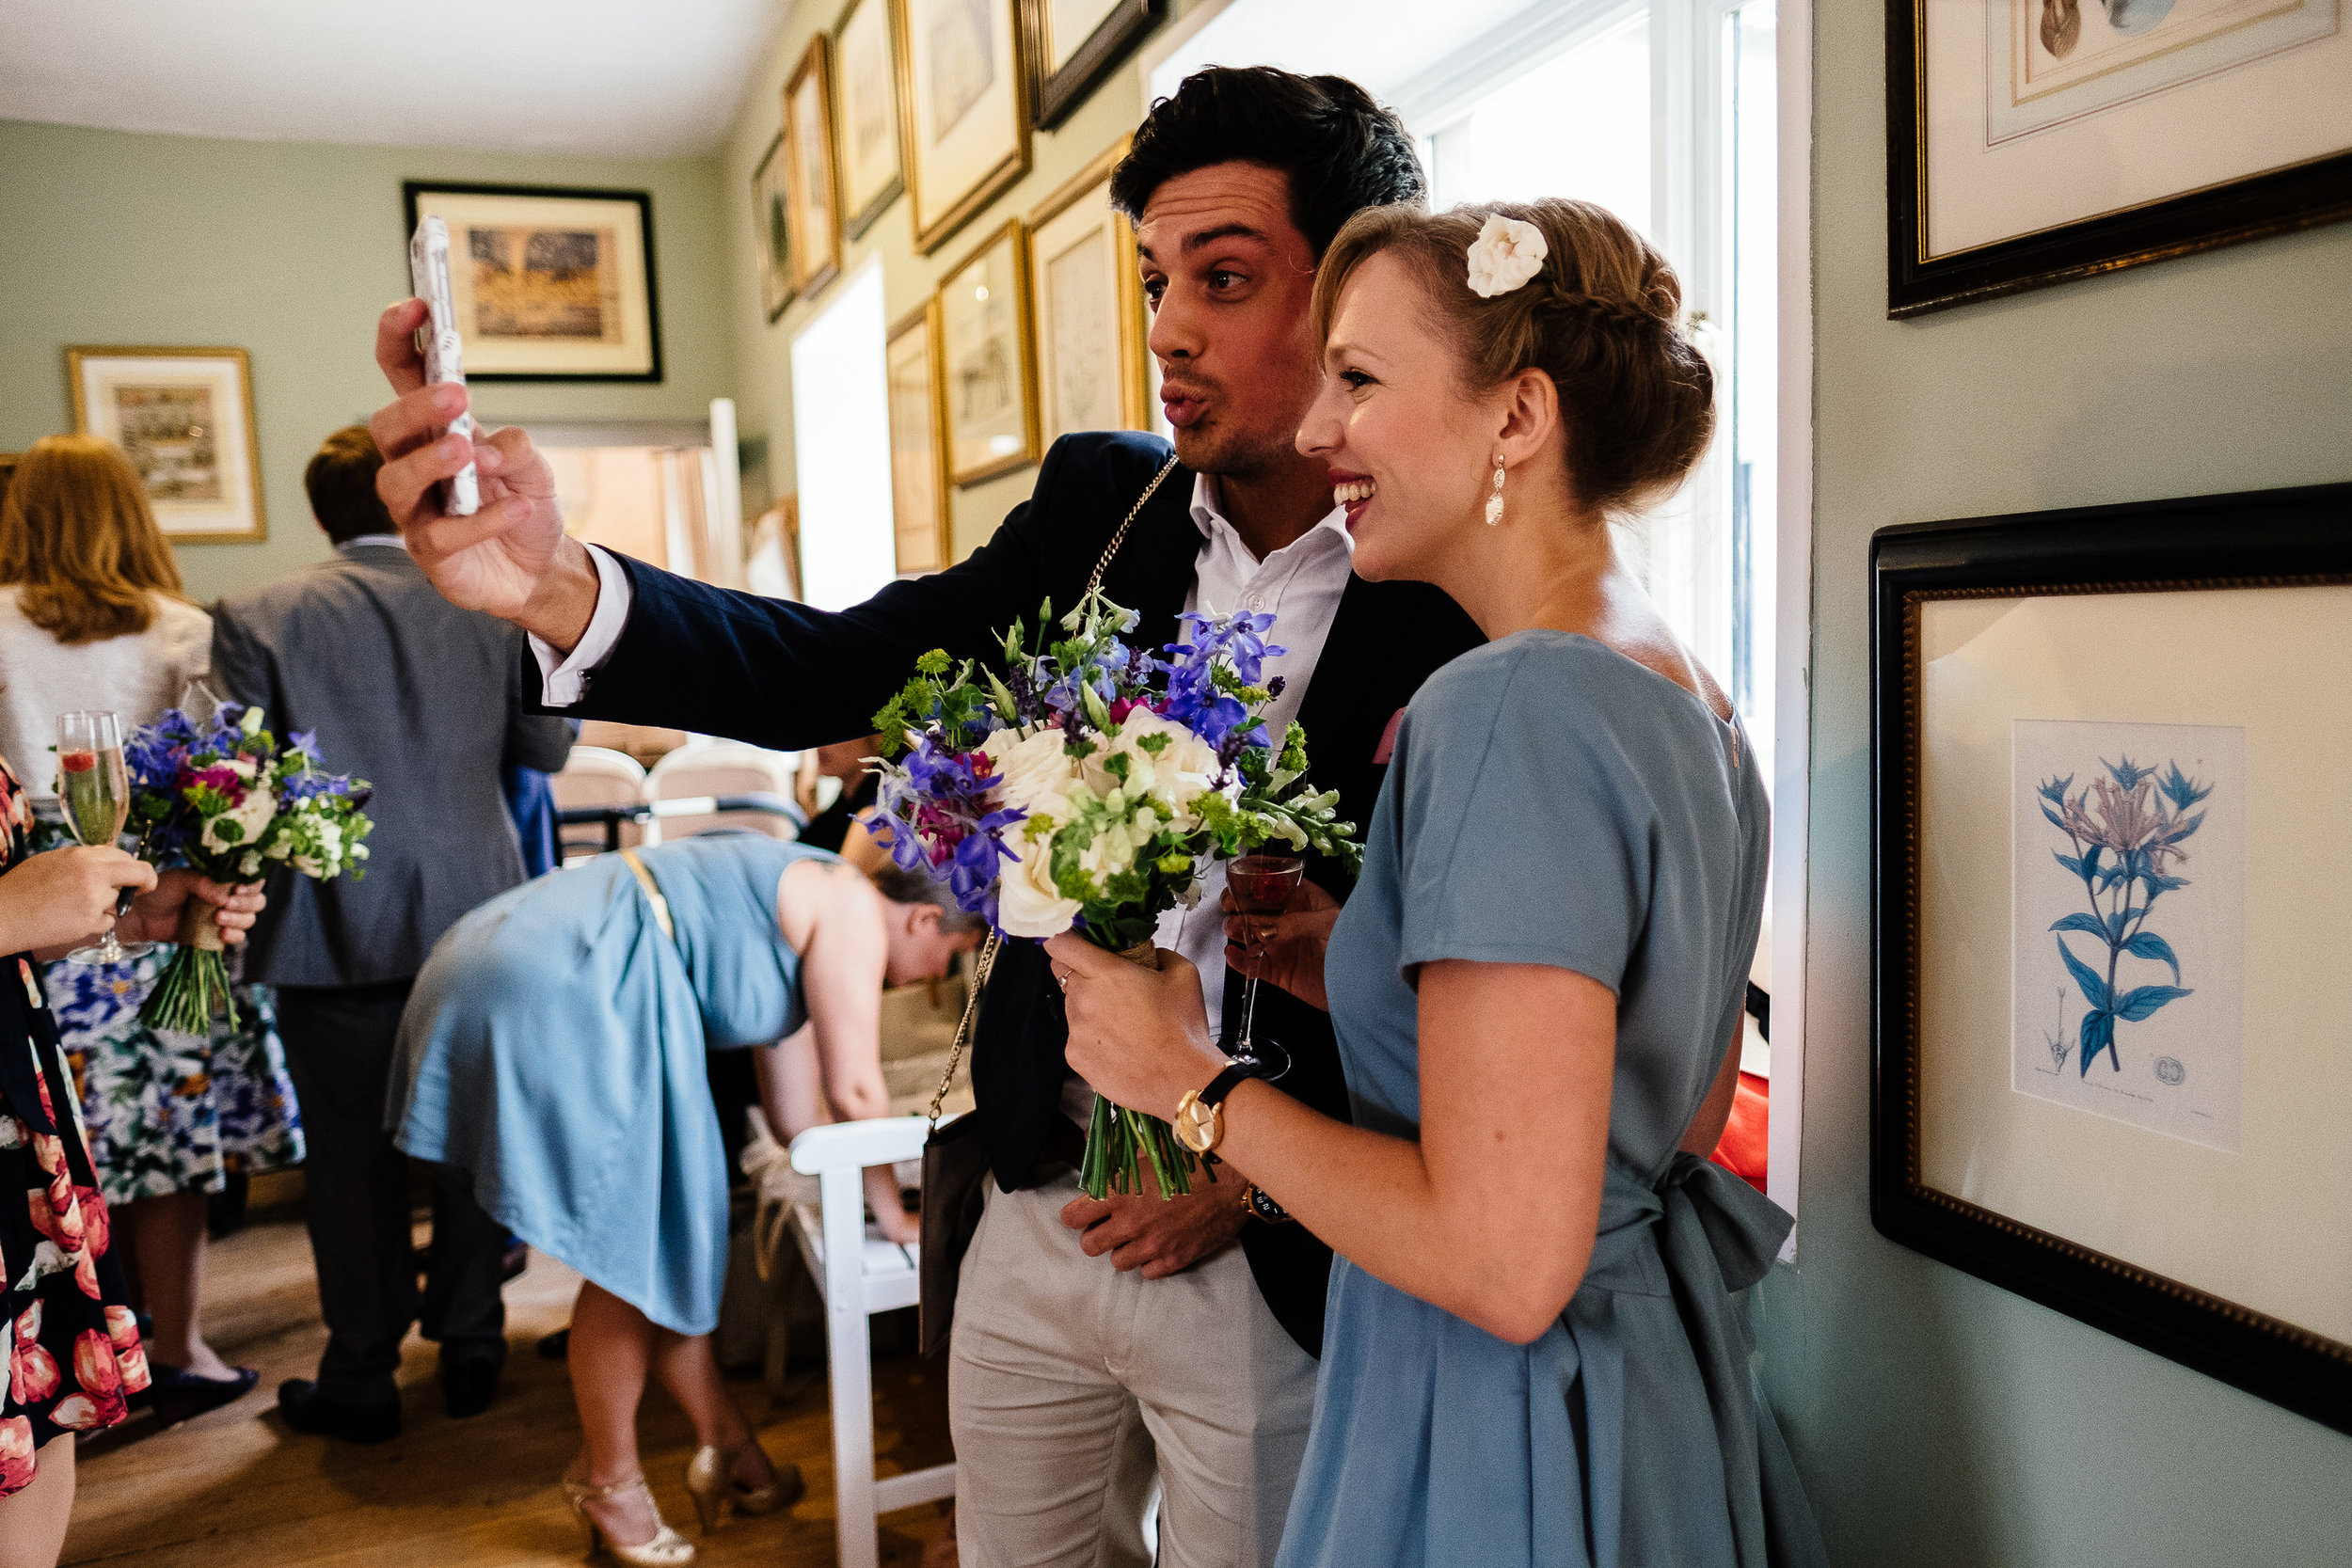 Guests taking a selfie at Merriscourt Wedding Venue, Oxfordshire